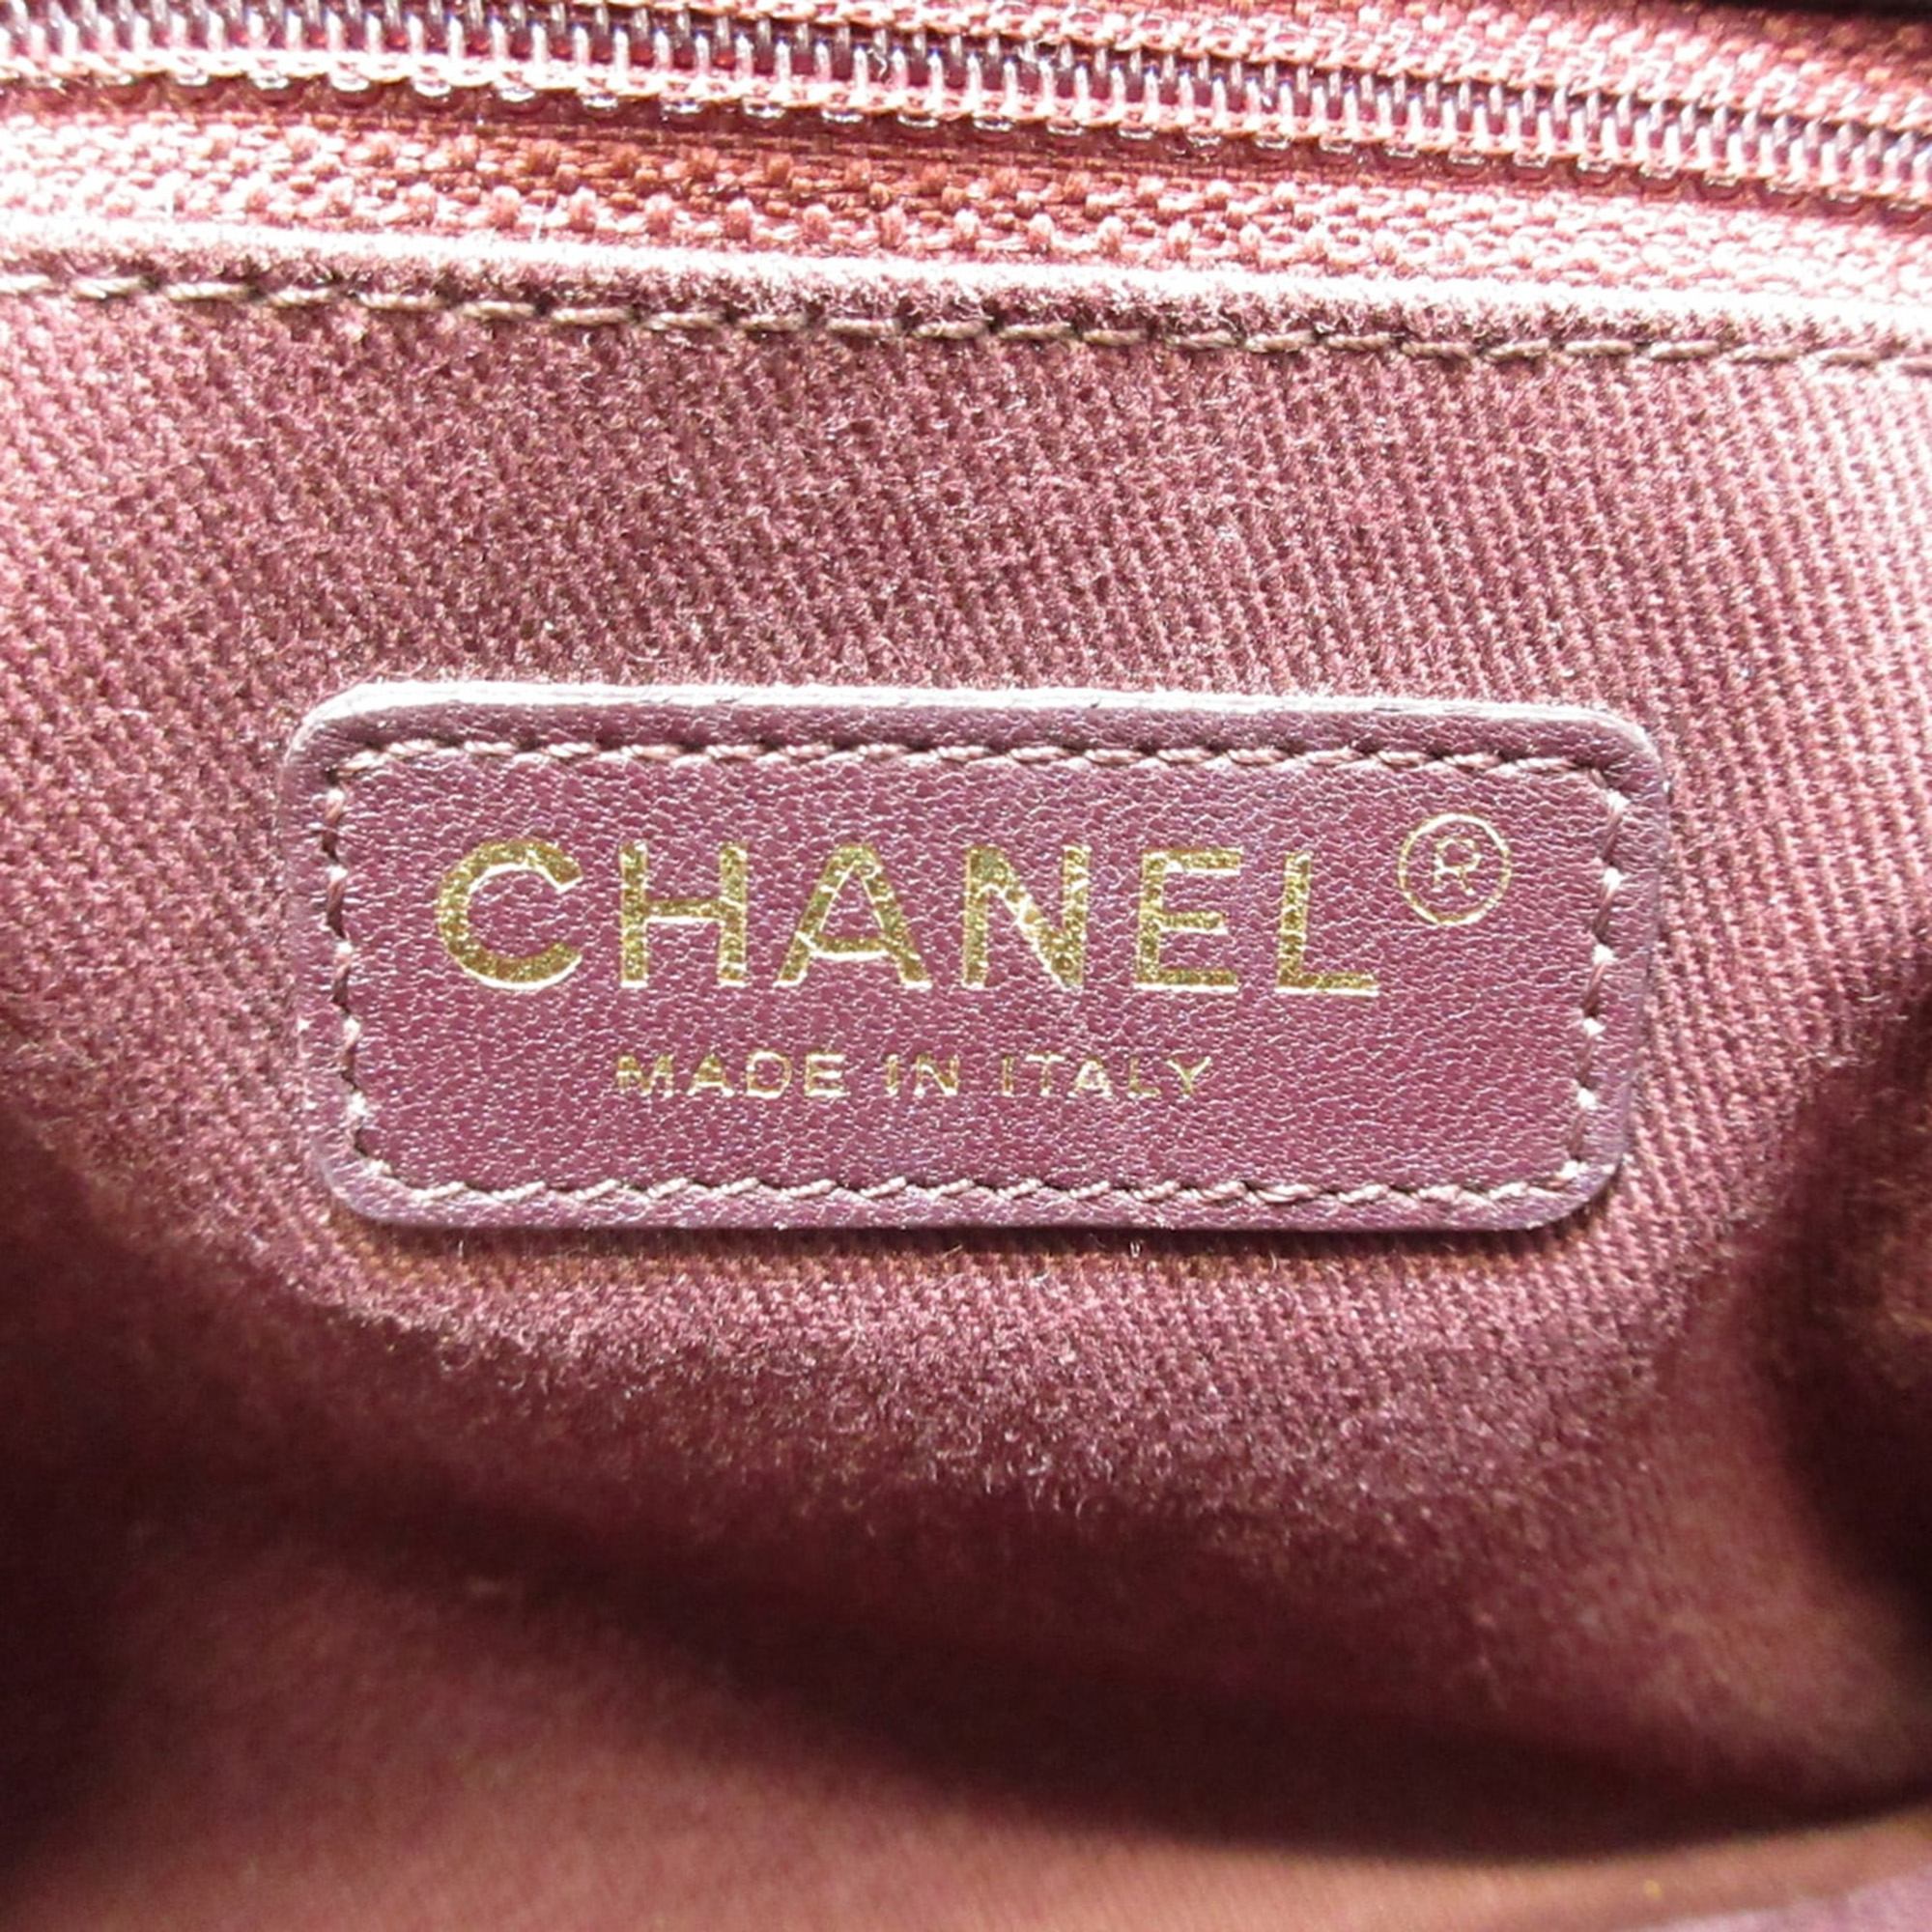 Chanel Black Patent Leather Tote Bag